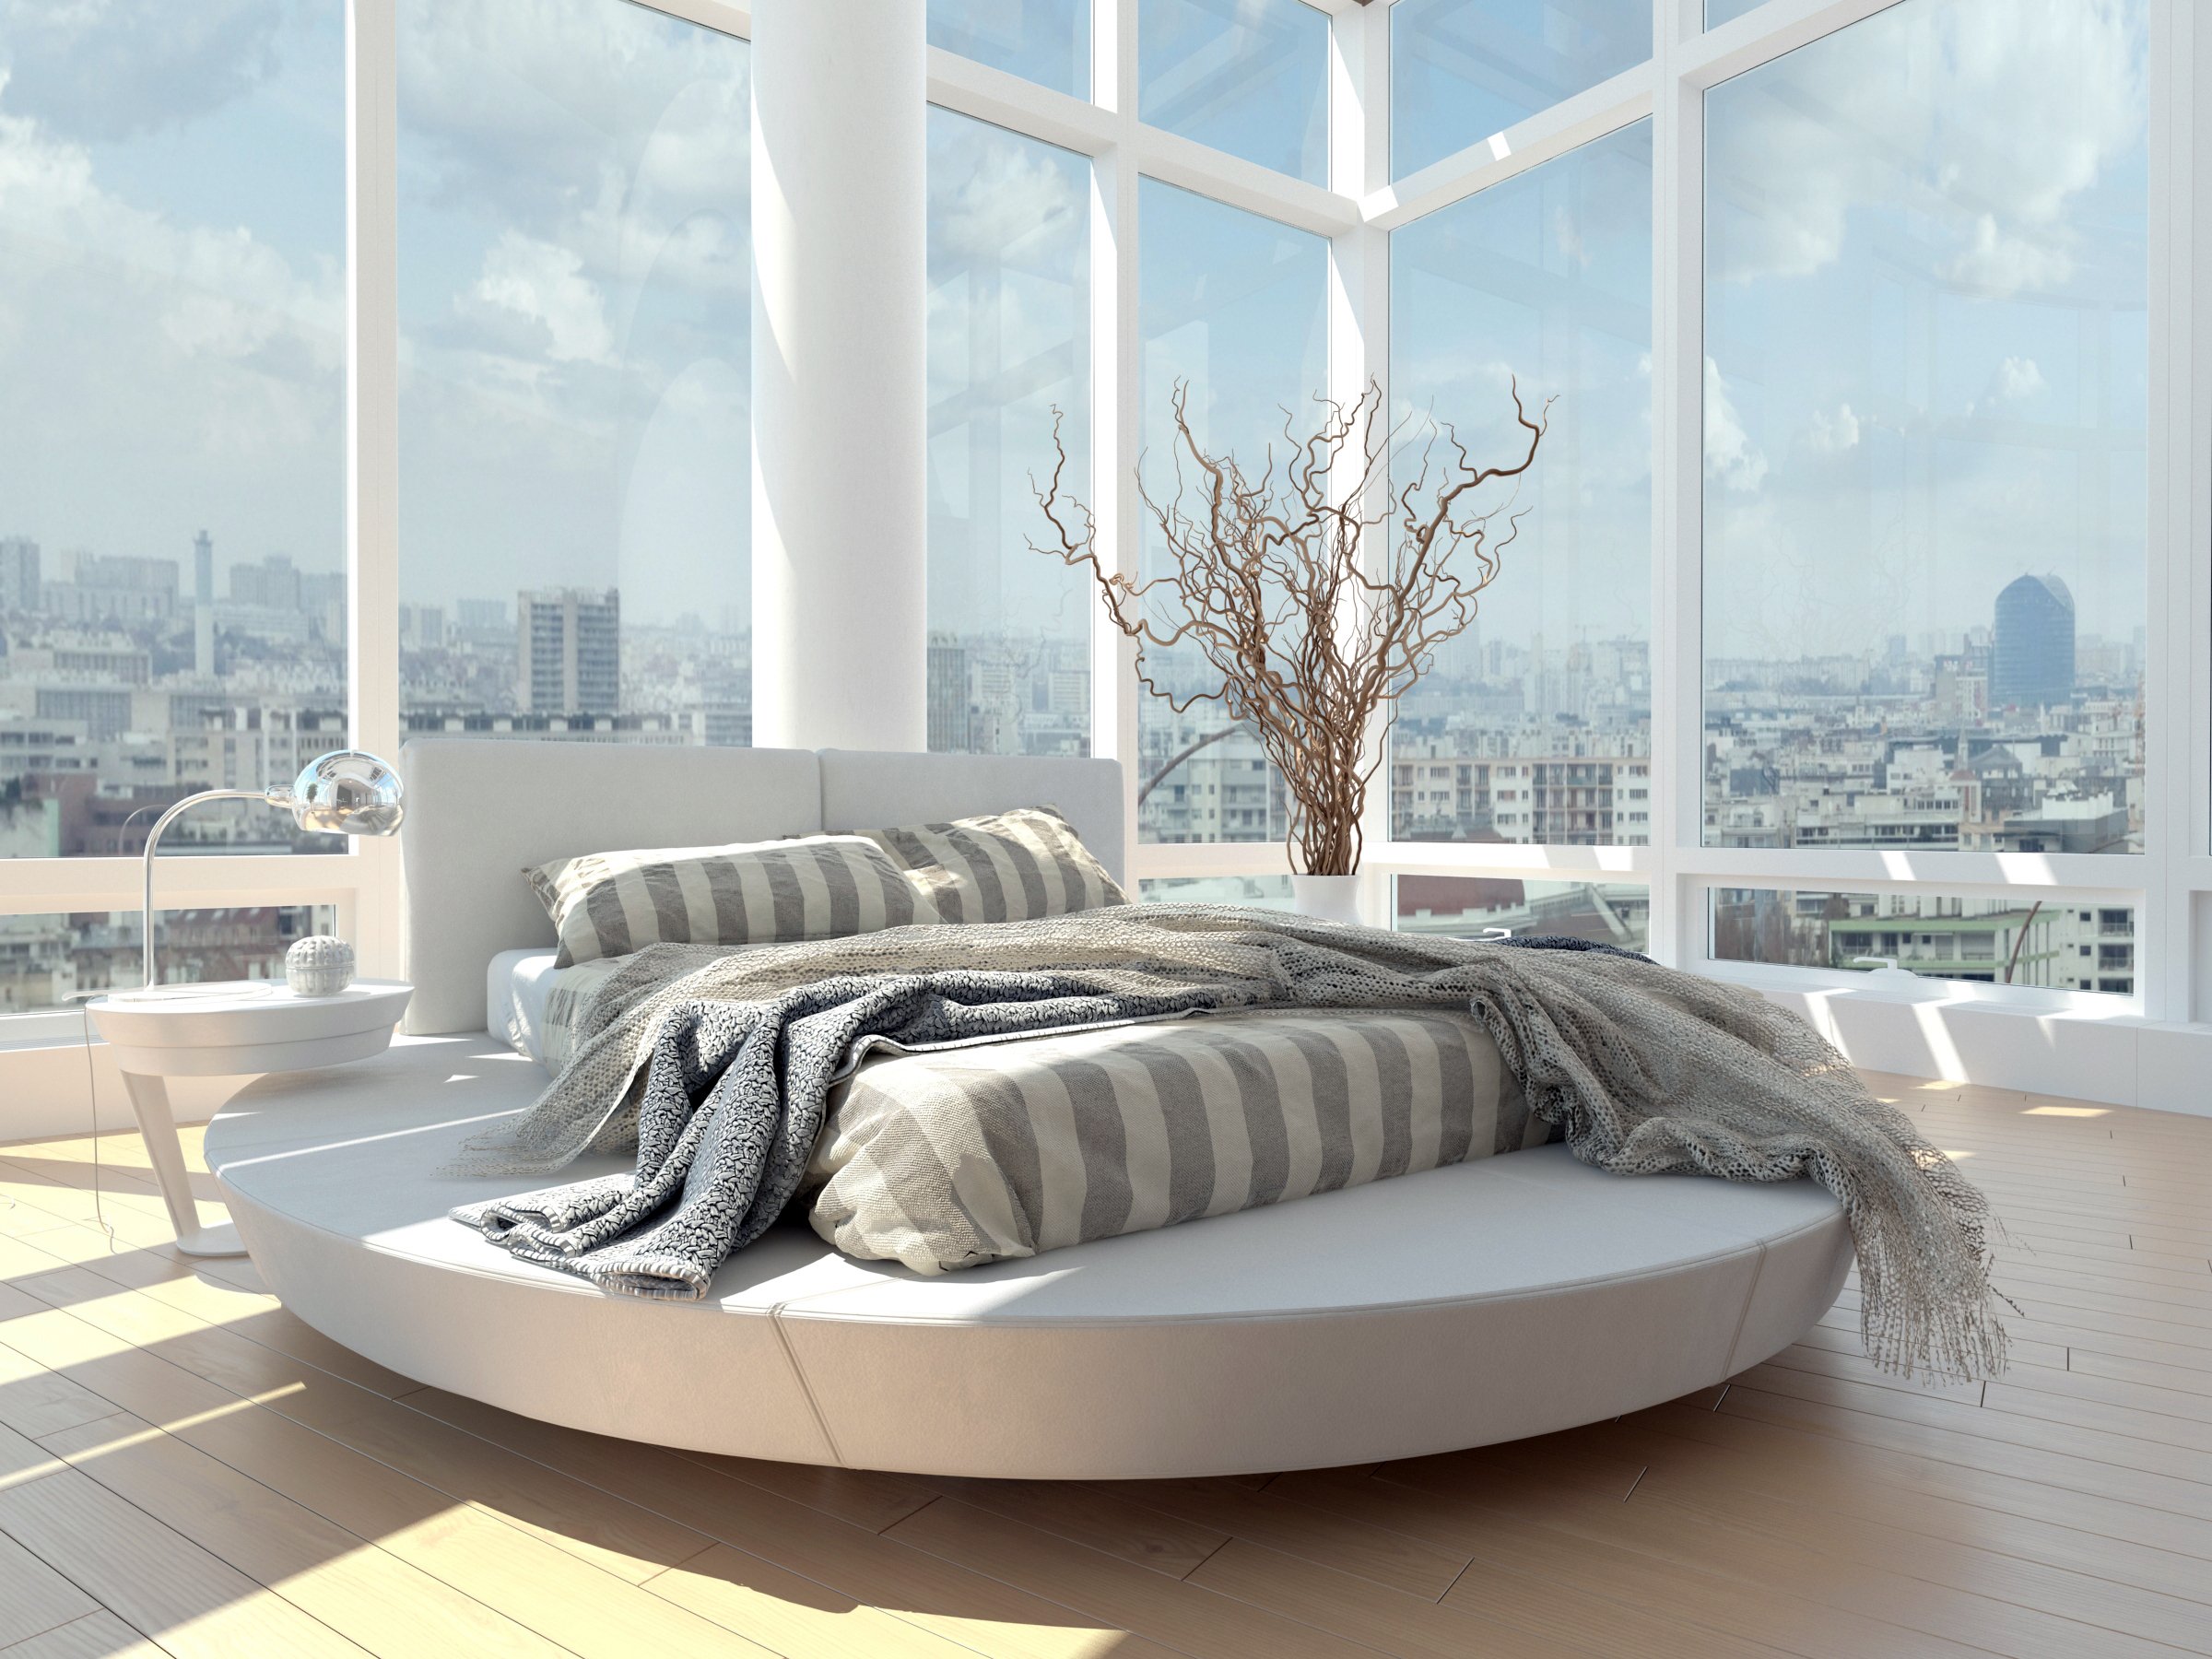 Bed with Skyline Backdrop.jpg